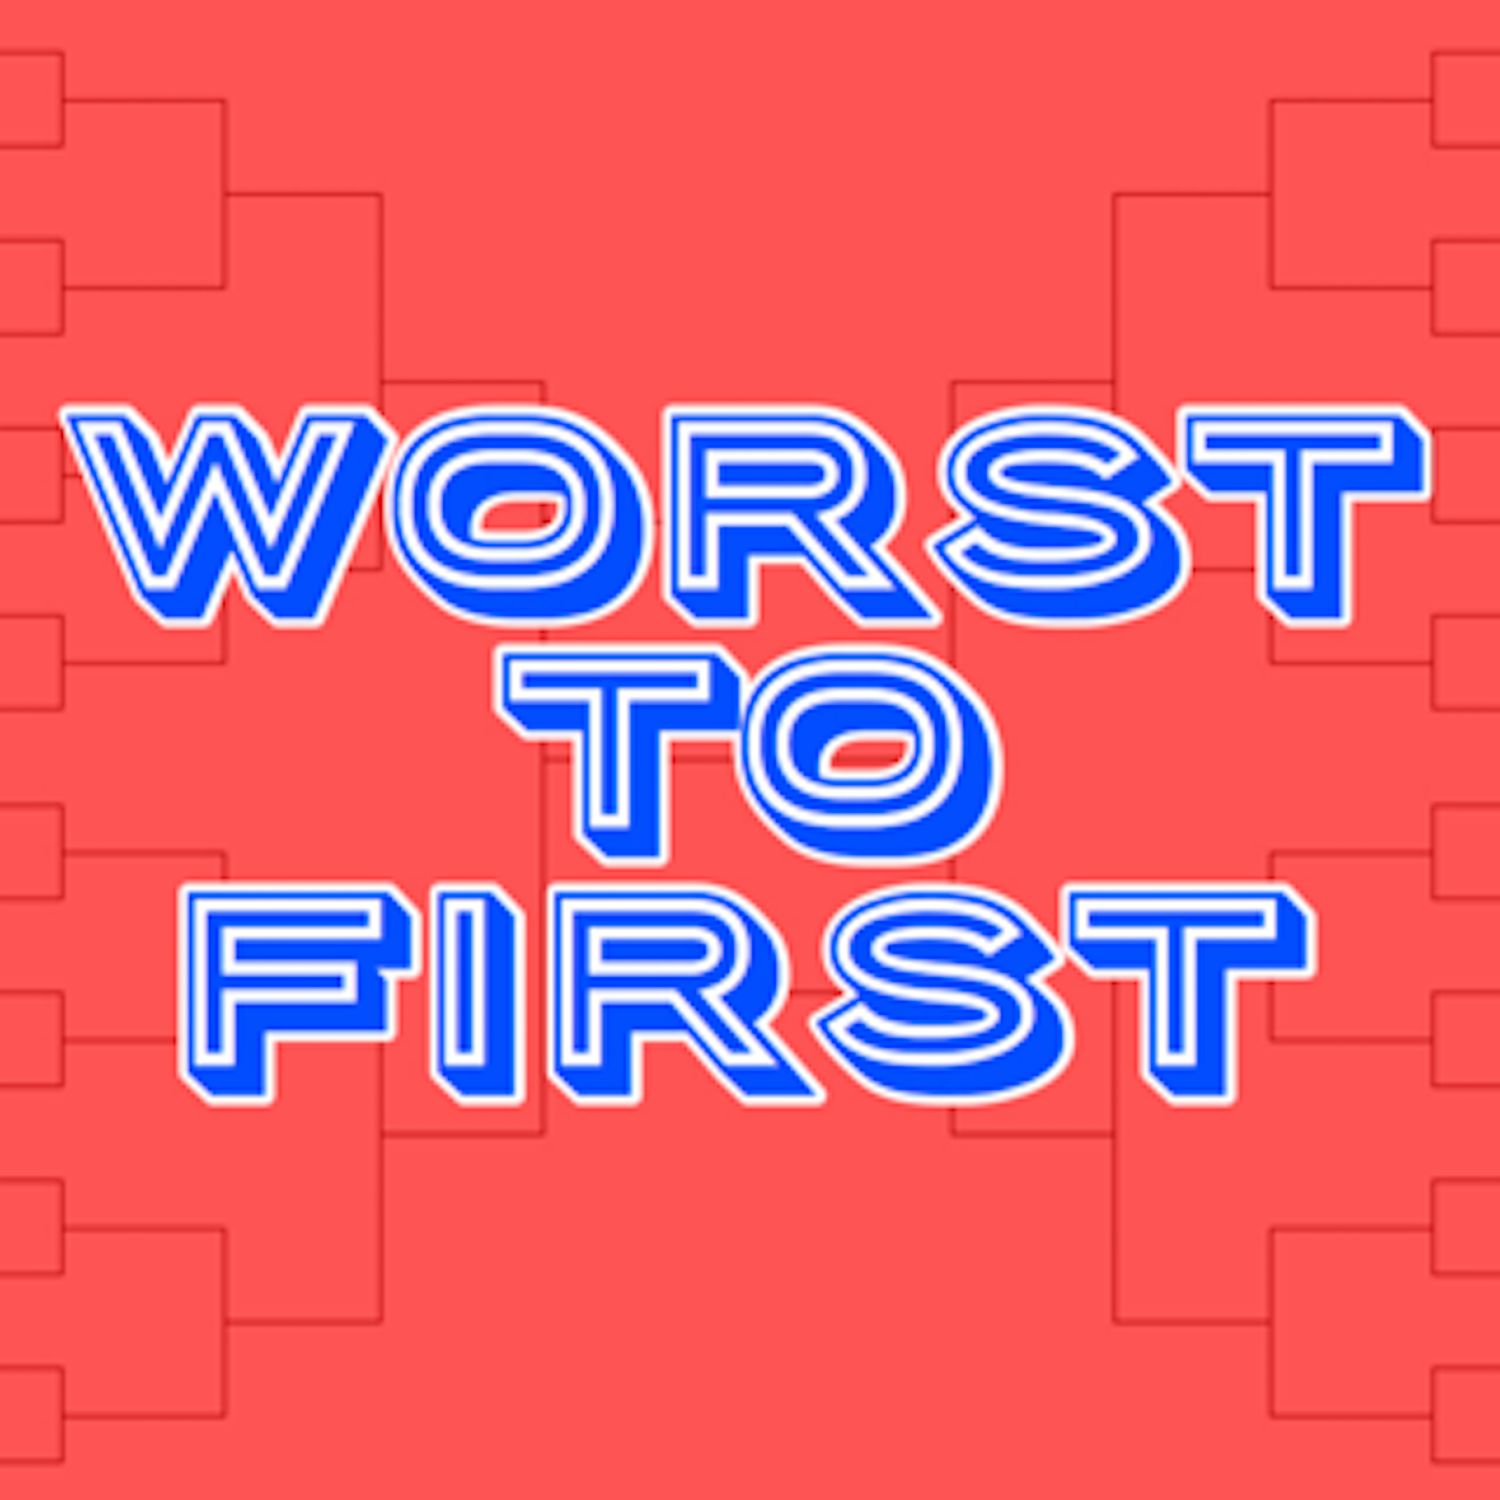 Worst to First